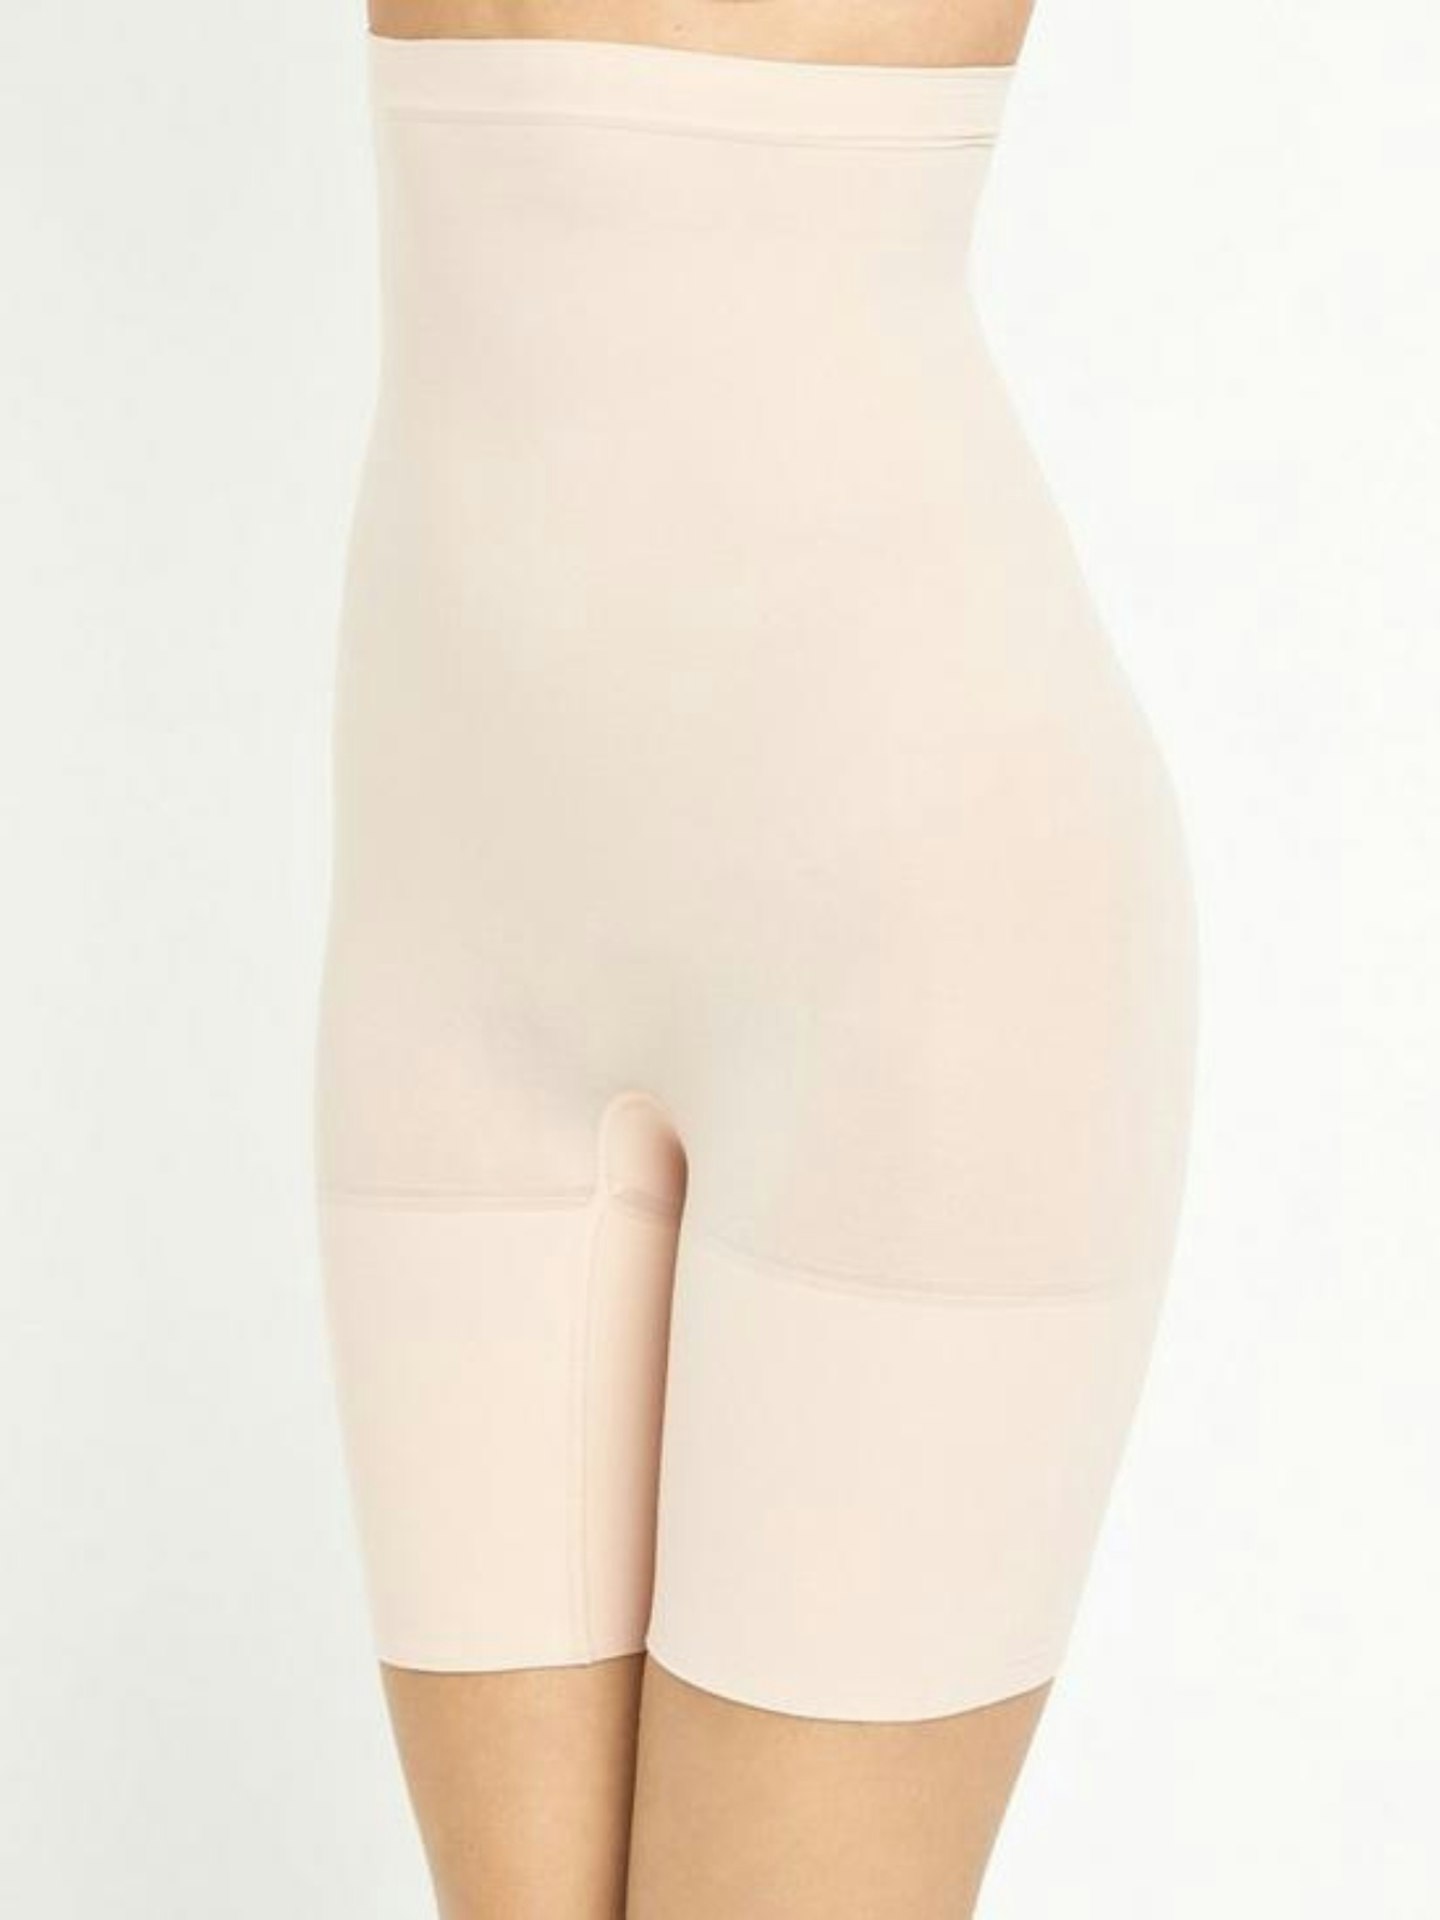 Shapewear & Fajas Colombianas: Truly Invisible Hi-Waist Control Panty Short  